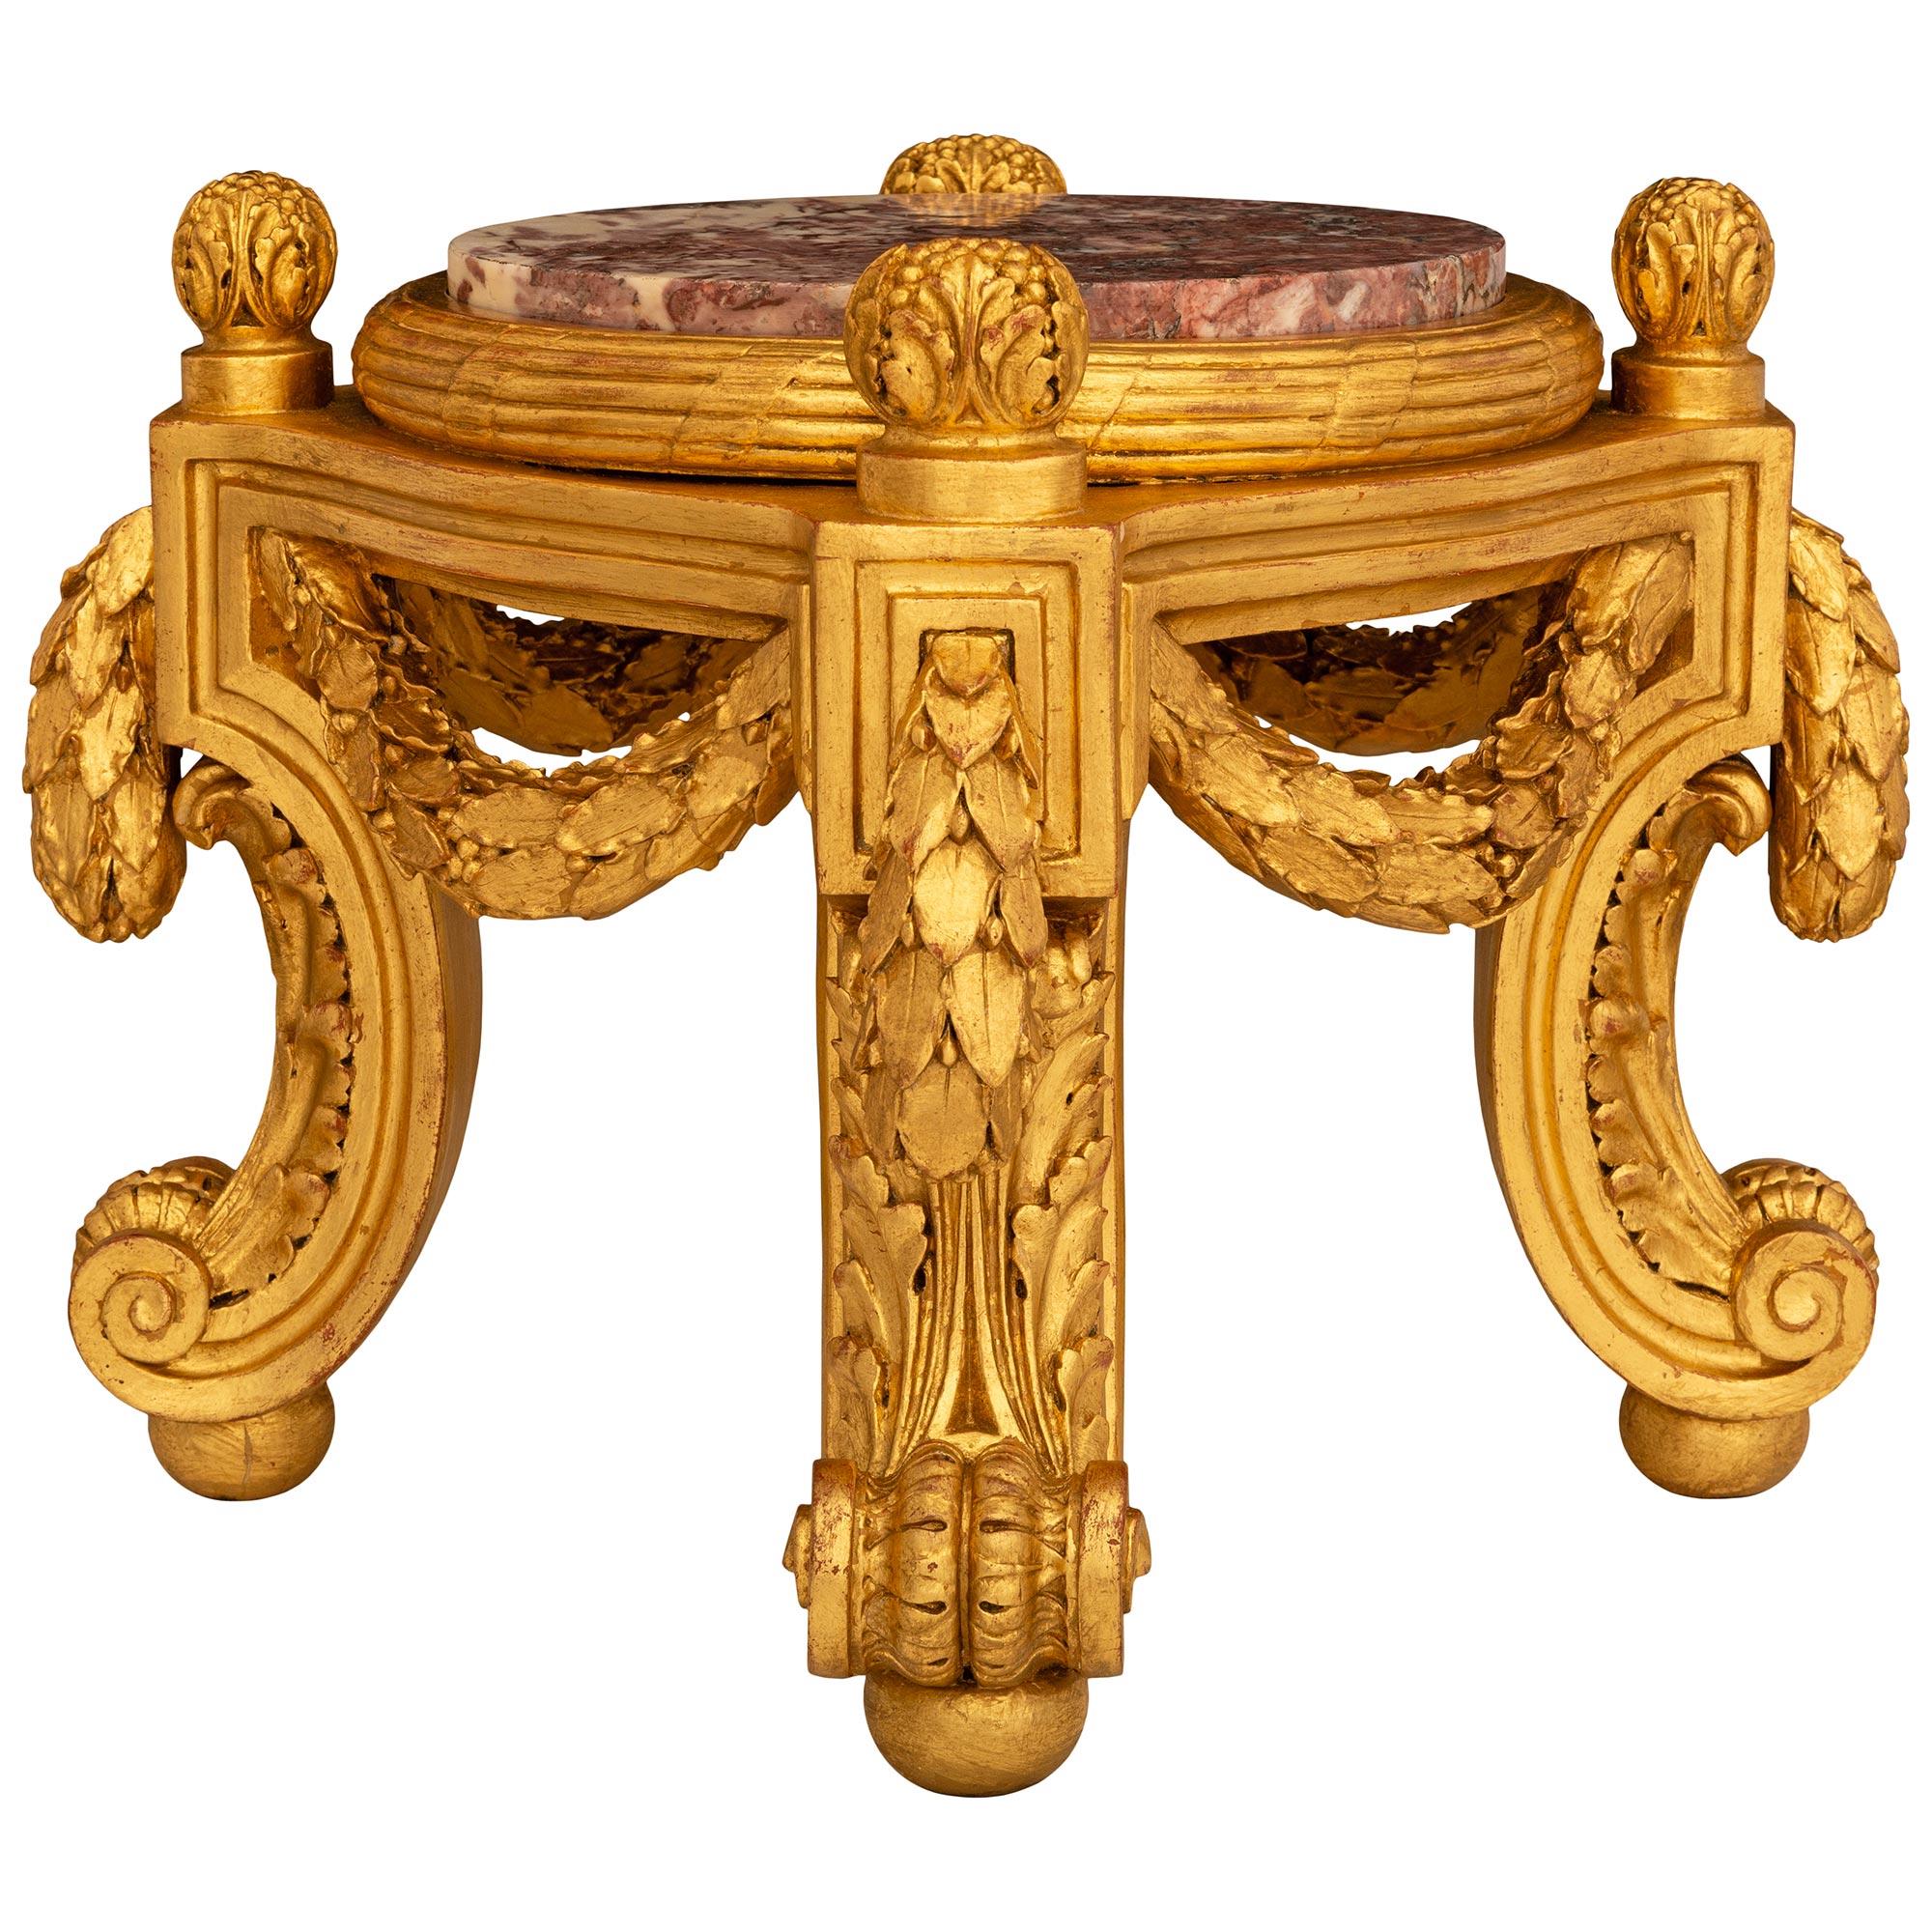 Louis XVI French 19th century Belle Epoque period Giltwood and marble pedestal For Sale